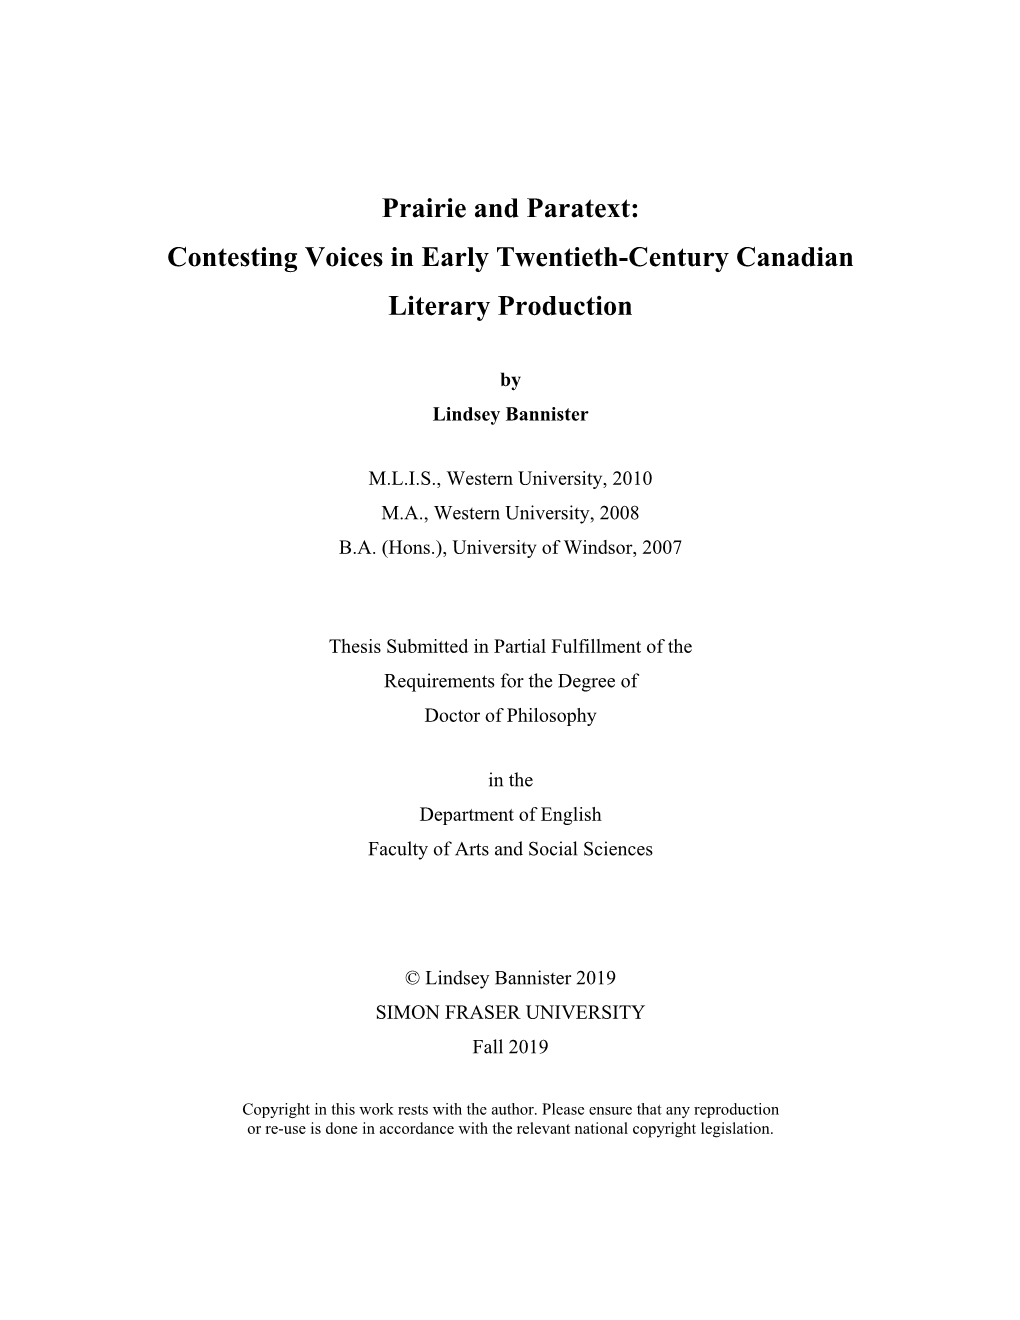 Prairie and Paratext: Contesting Voices in Early Twentieth-Century Canadian Literary Production